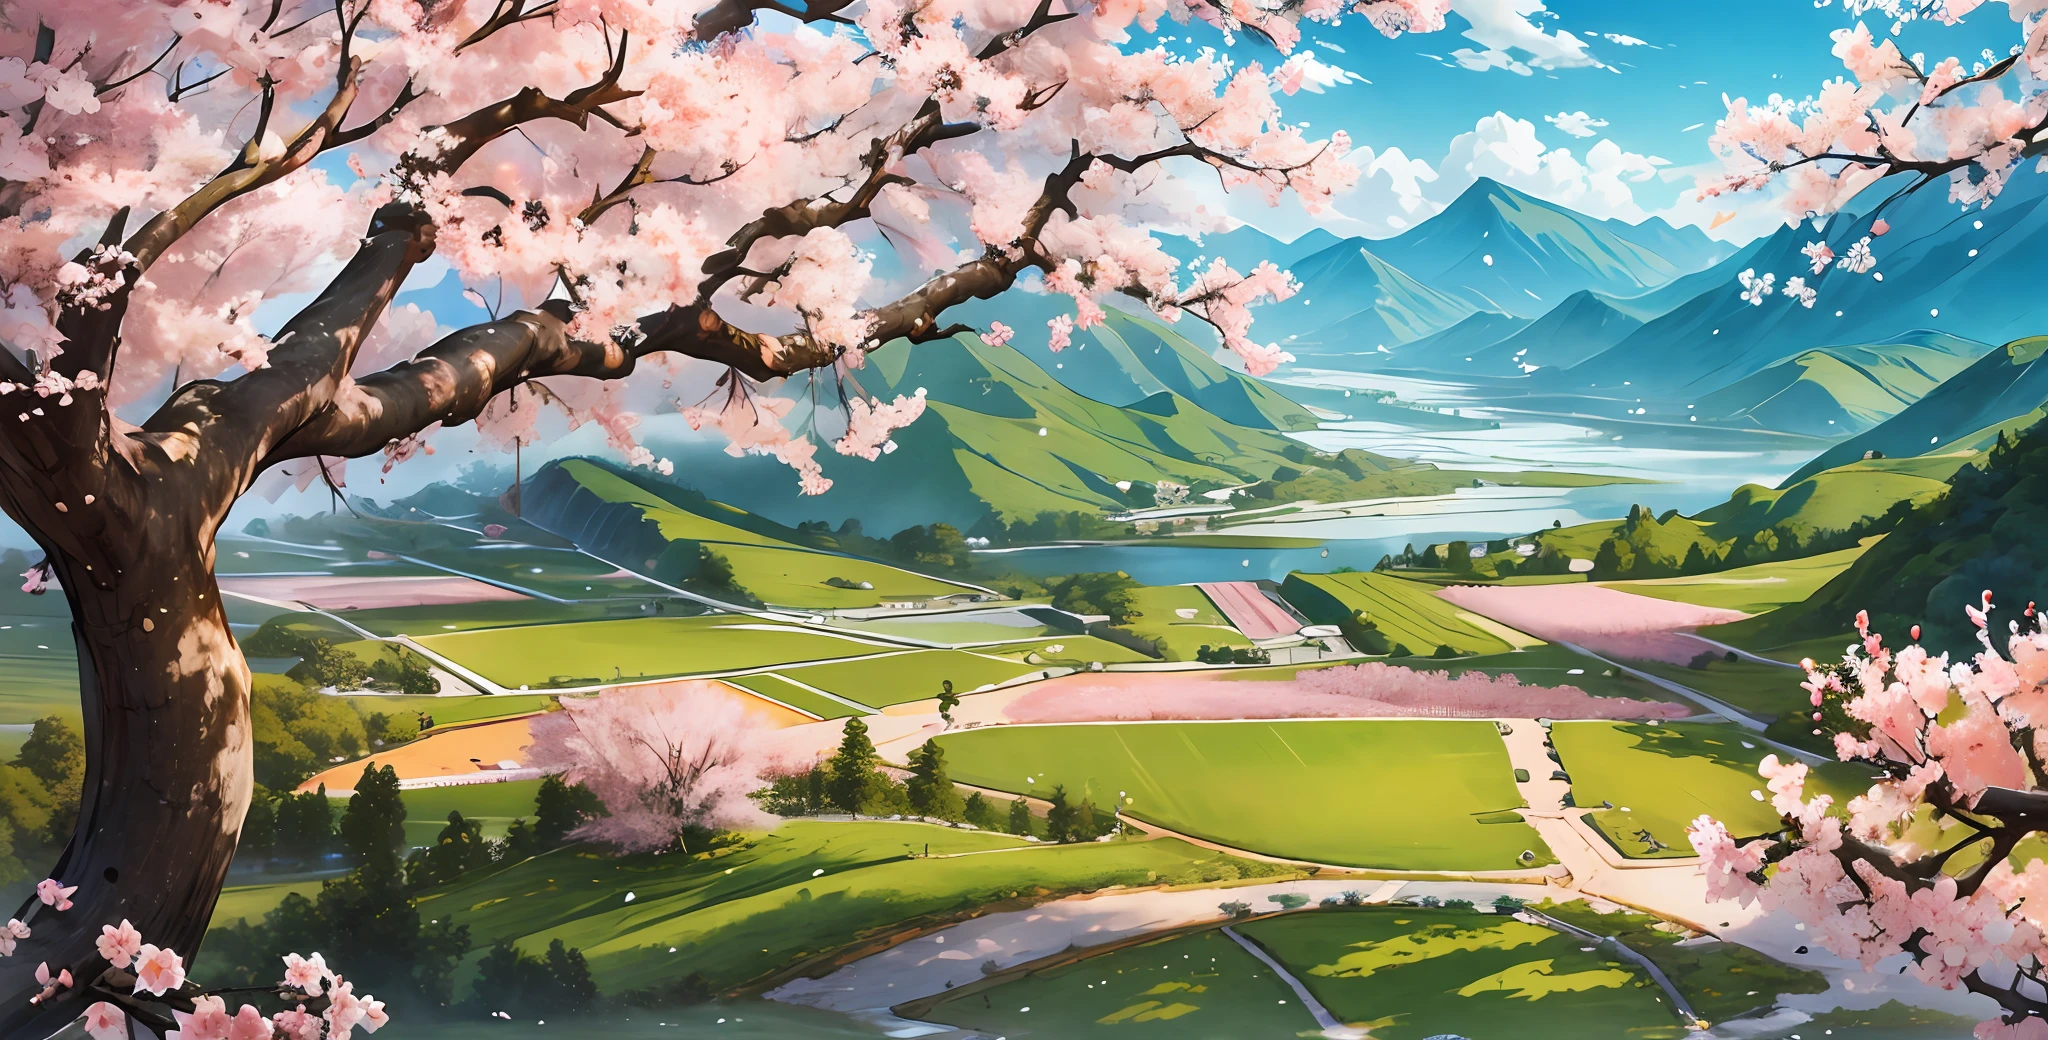 official art, Chinese landscape, peach blossom forest, beautiful landscape, masterpiece, high quality, exquisite graphics, high detail, epic landscape,